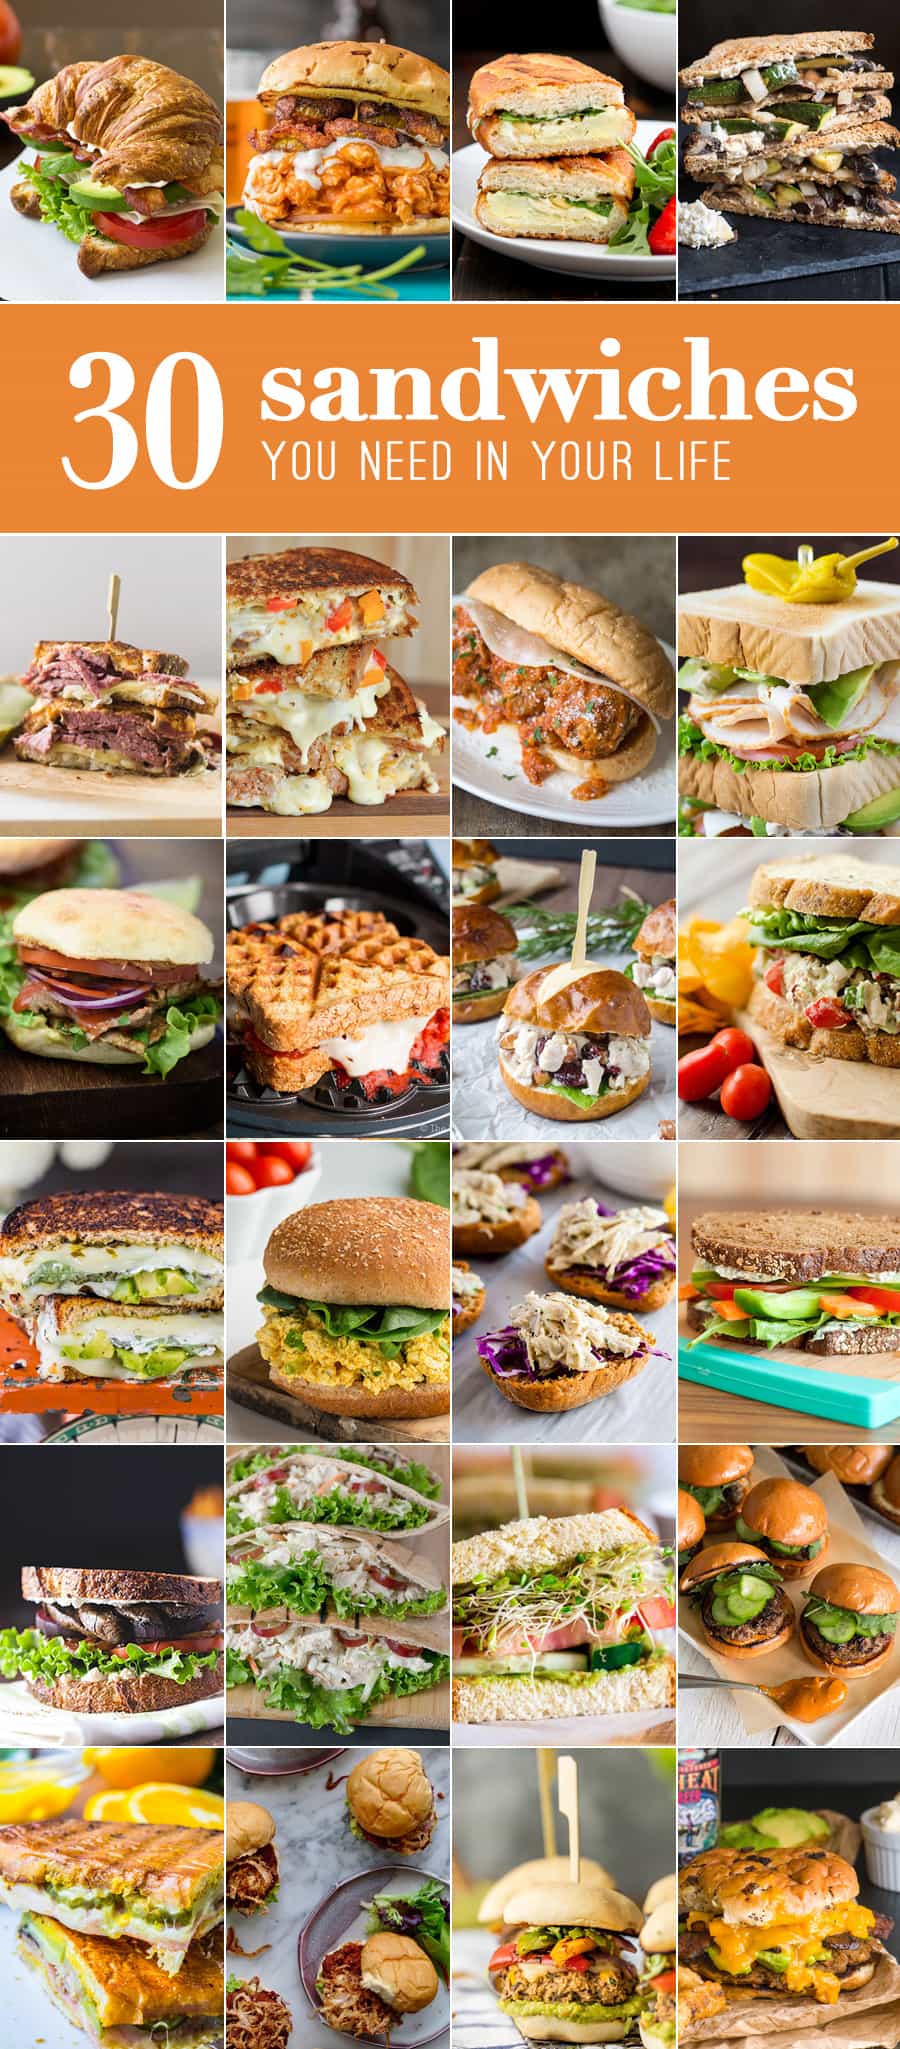 30 Sandwiches! These easy sandwich recipes are some of my favorite meals! Everything from meatball subs to creative grilled cheese recipes. ALL THE BEST SANDWICH RECIPES!